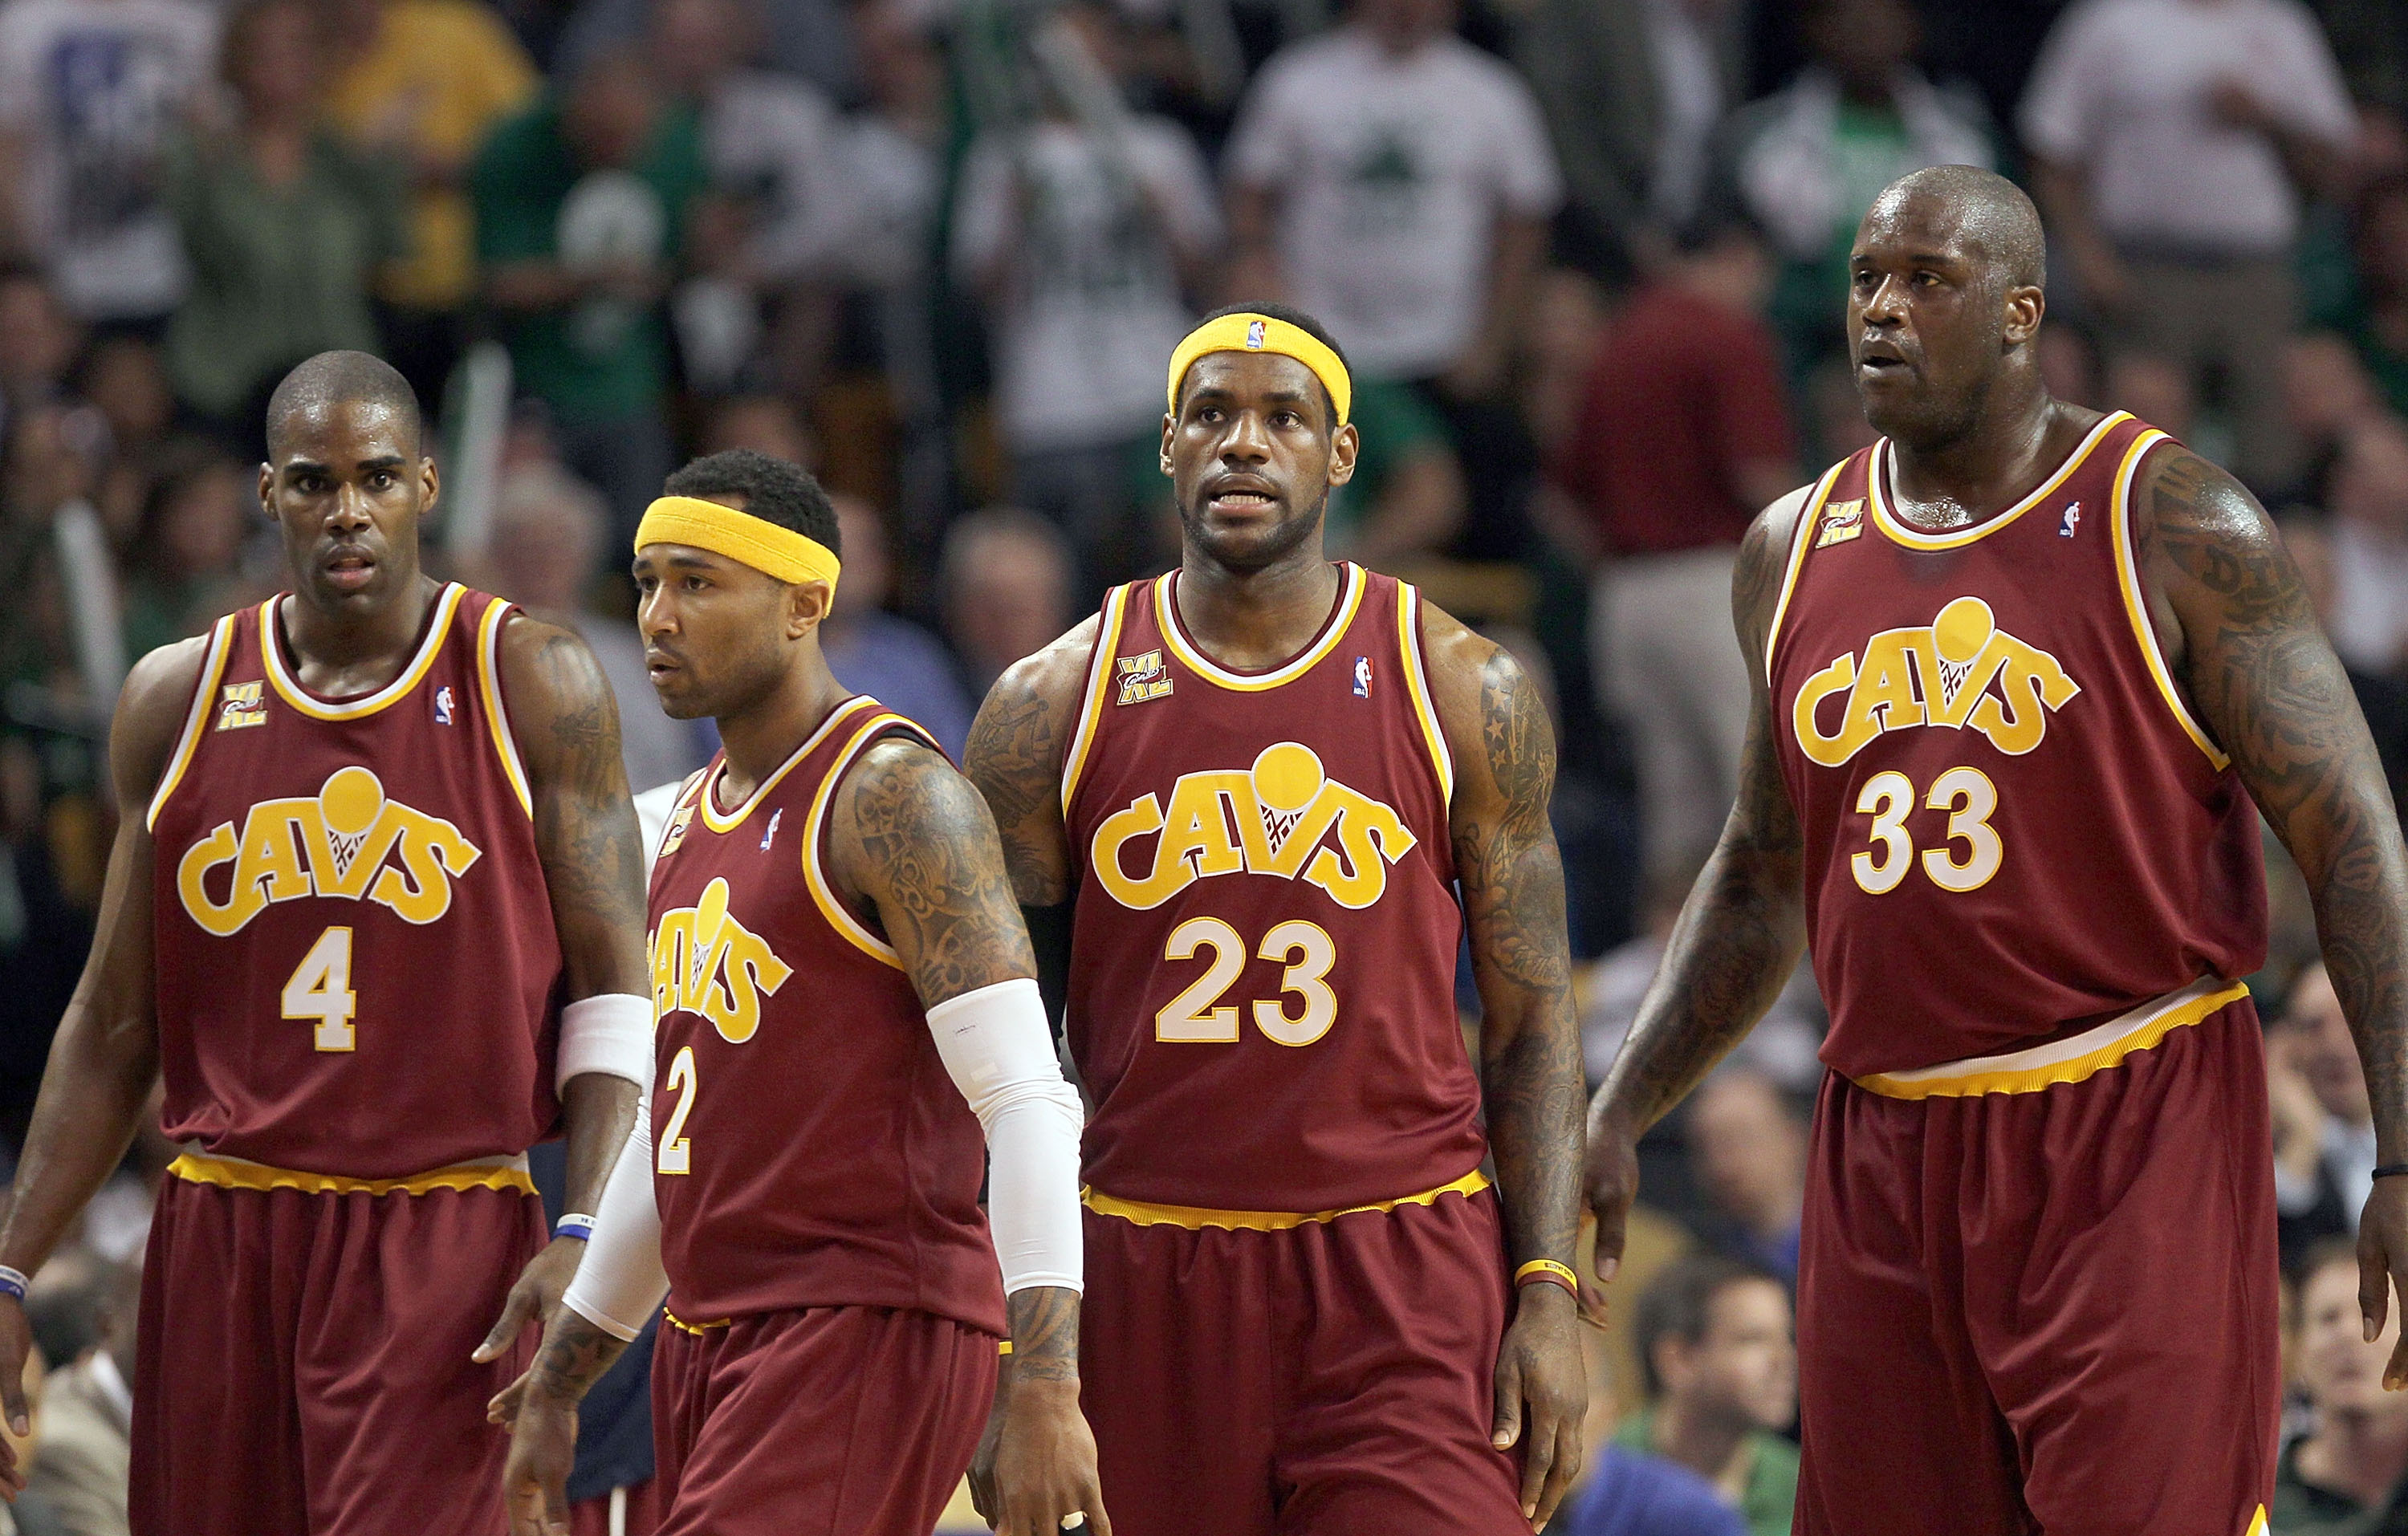 Carlos Boozer recounts the iconic rookie season of LeBron James in